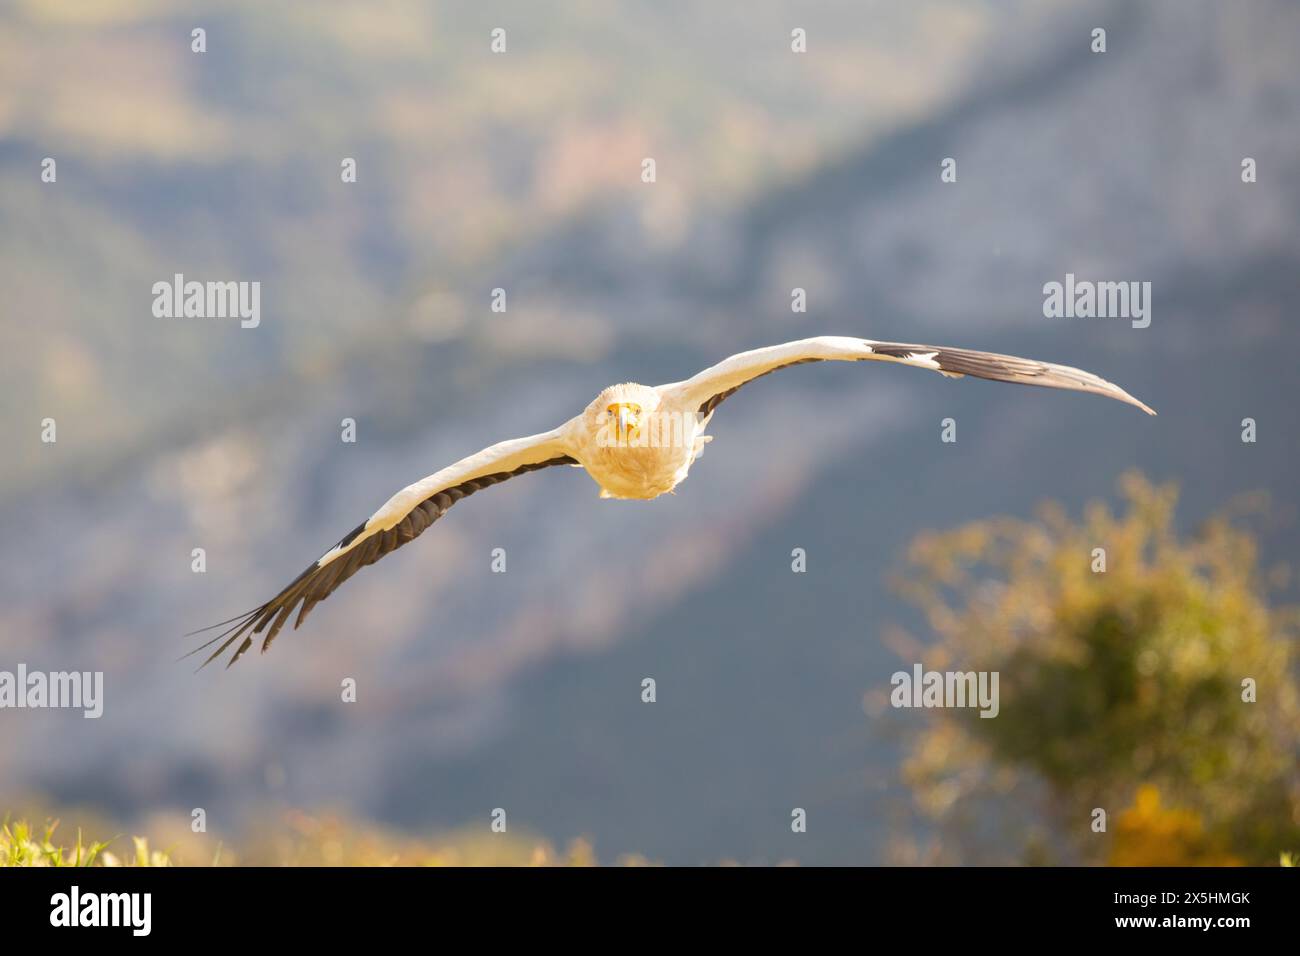 The globally endangered Egyptian vulture (Neophron percnopterus) in flight. Photographed in the mountains of Catalonia, Spain. Stock Photo